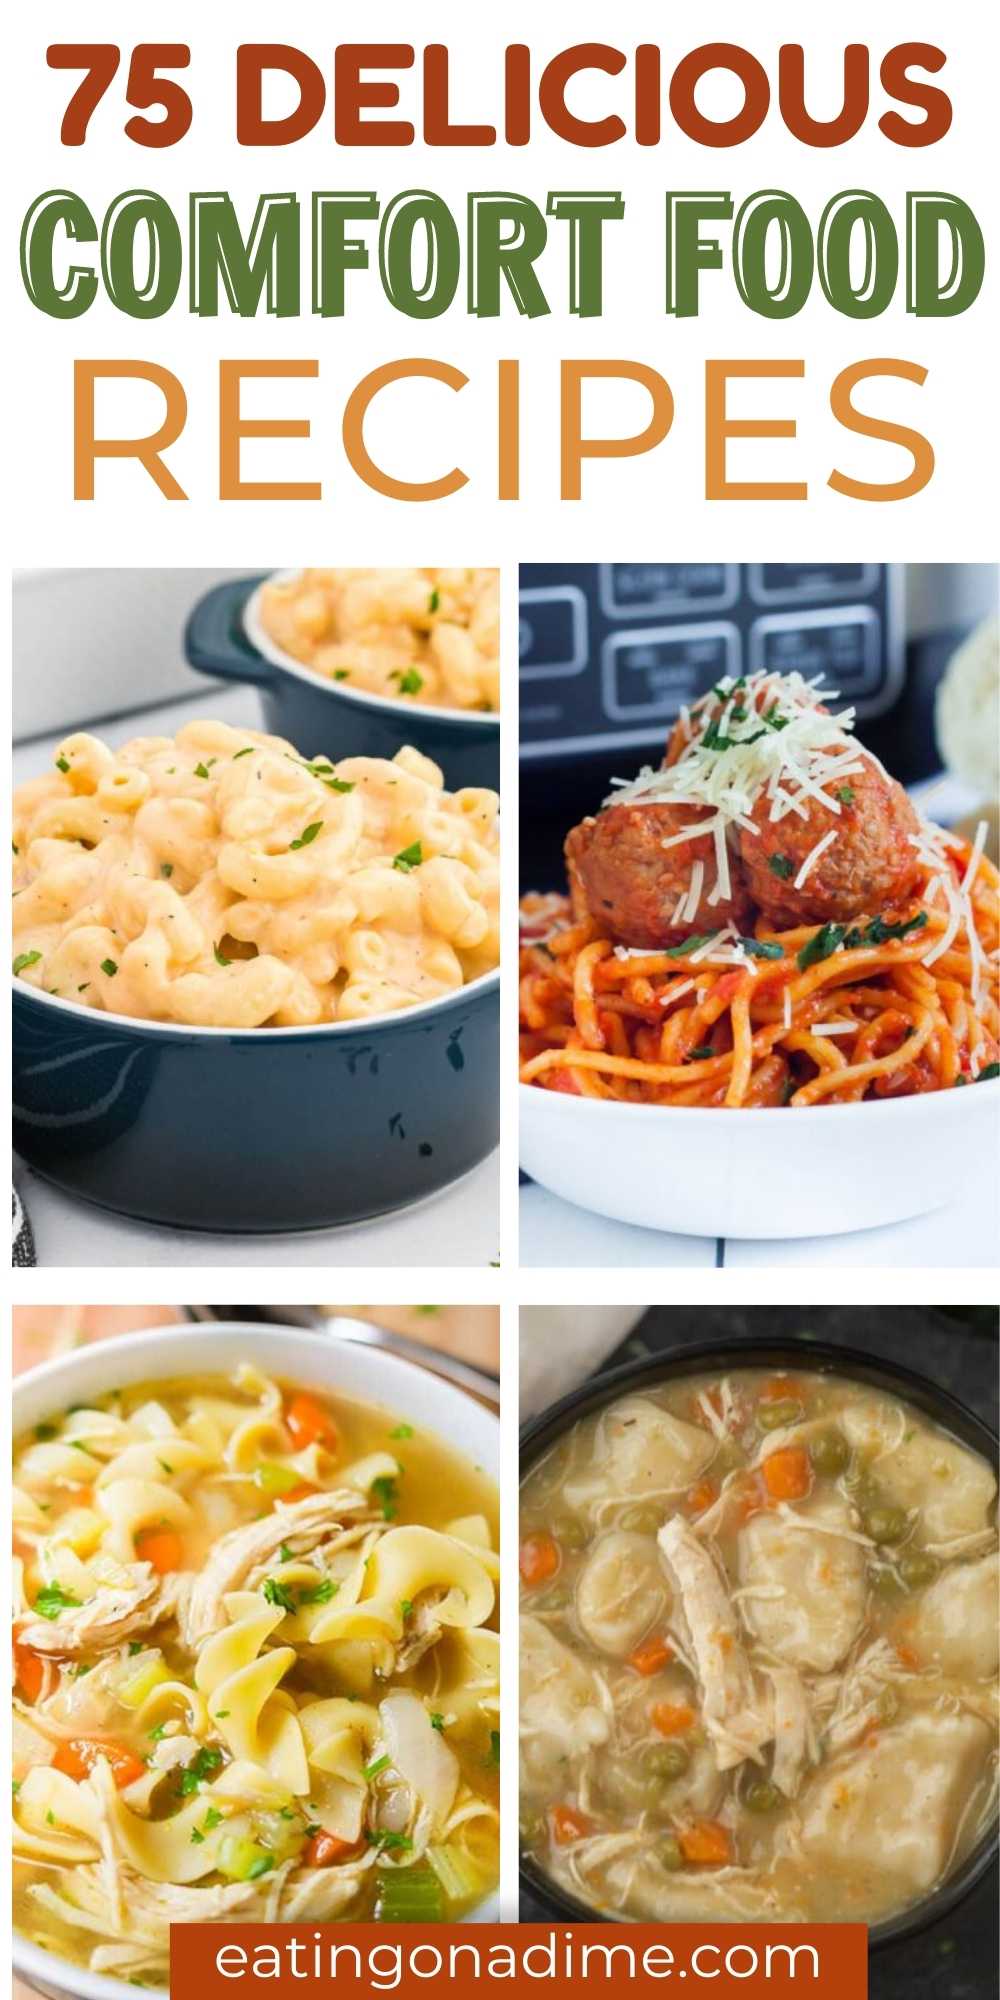 If you are looking for The Best Comfort Food Recipes then you have come to the right place. These 75 recipes are easy to make and so delicious. From Lasagna, soups, stews and desserts we love all things comfort and these recipes do not disappoint. #eatingonadime #comfortfood #easyrecipes